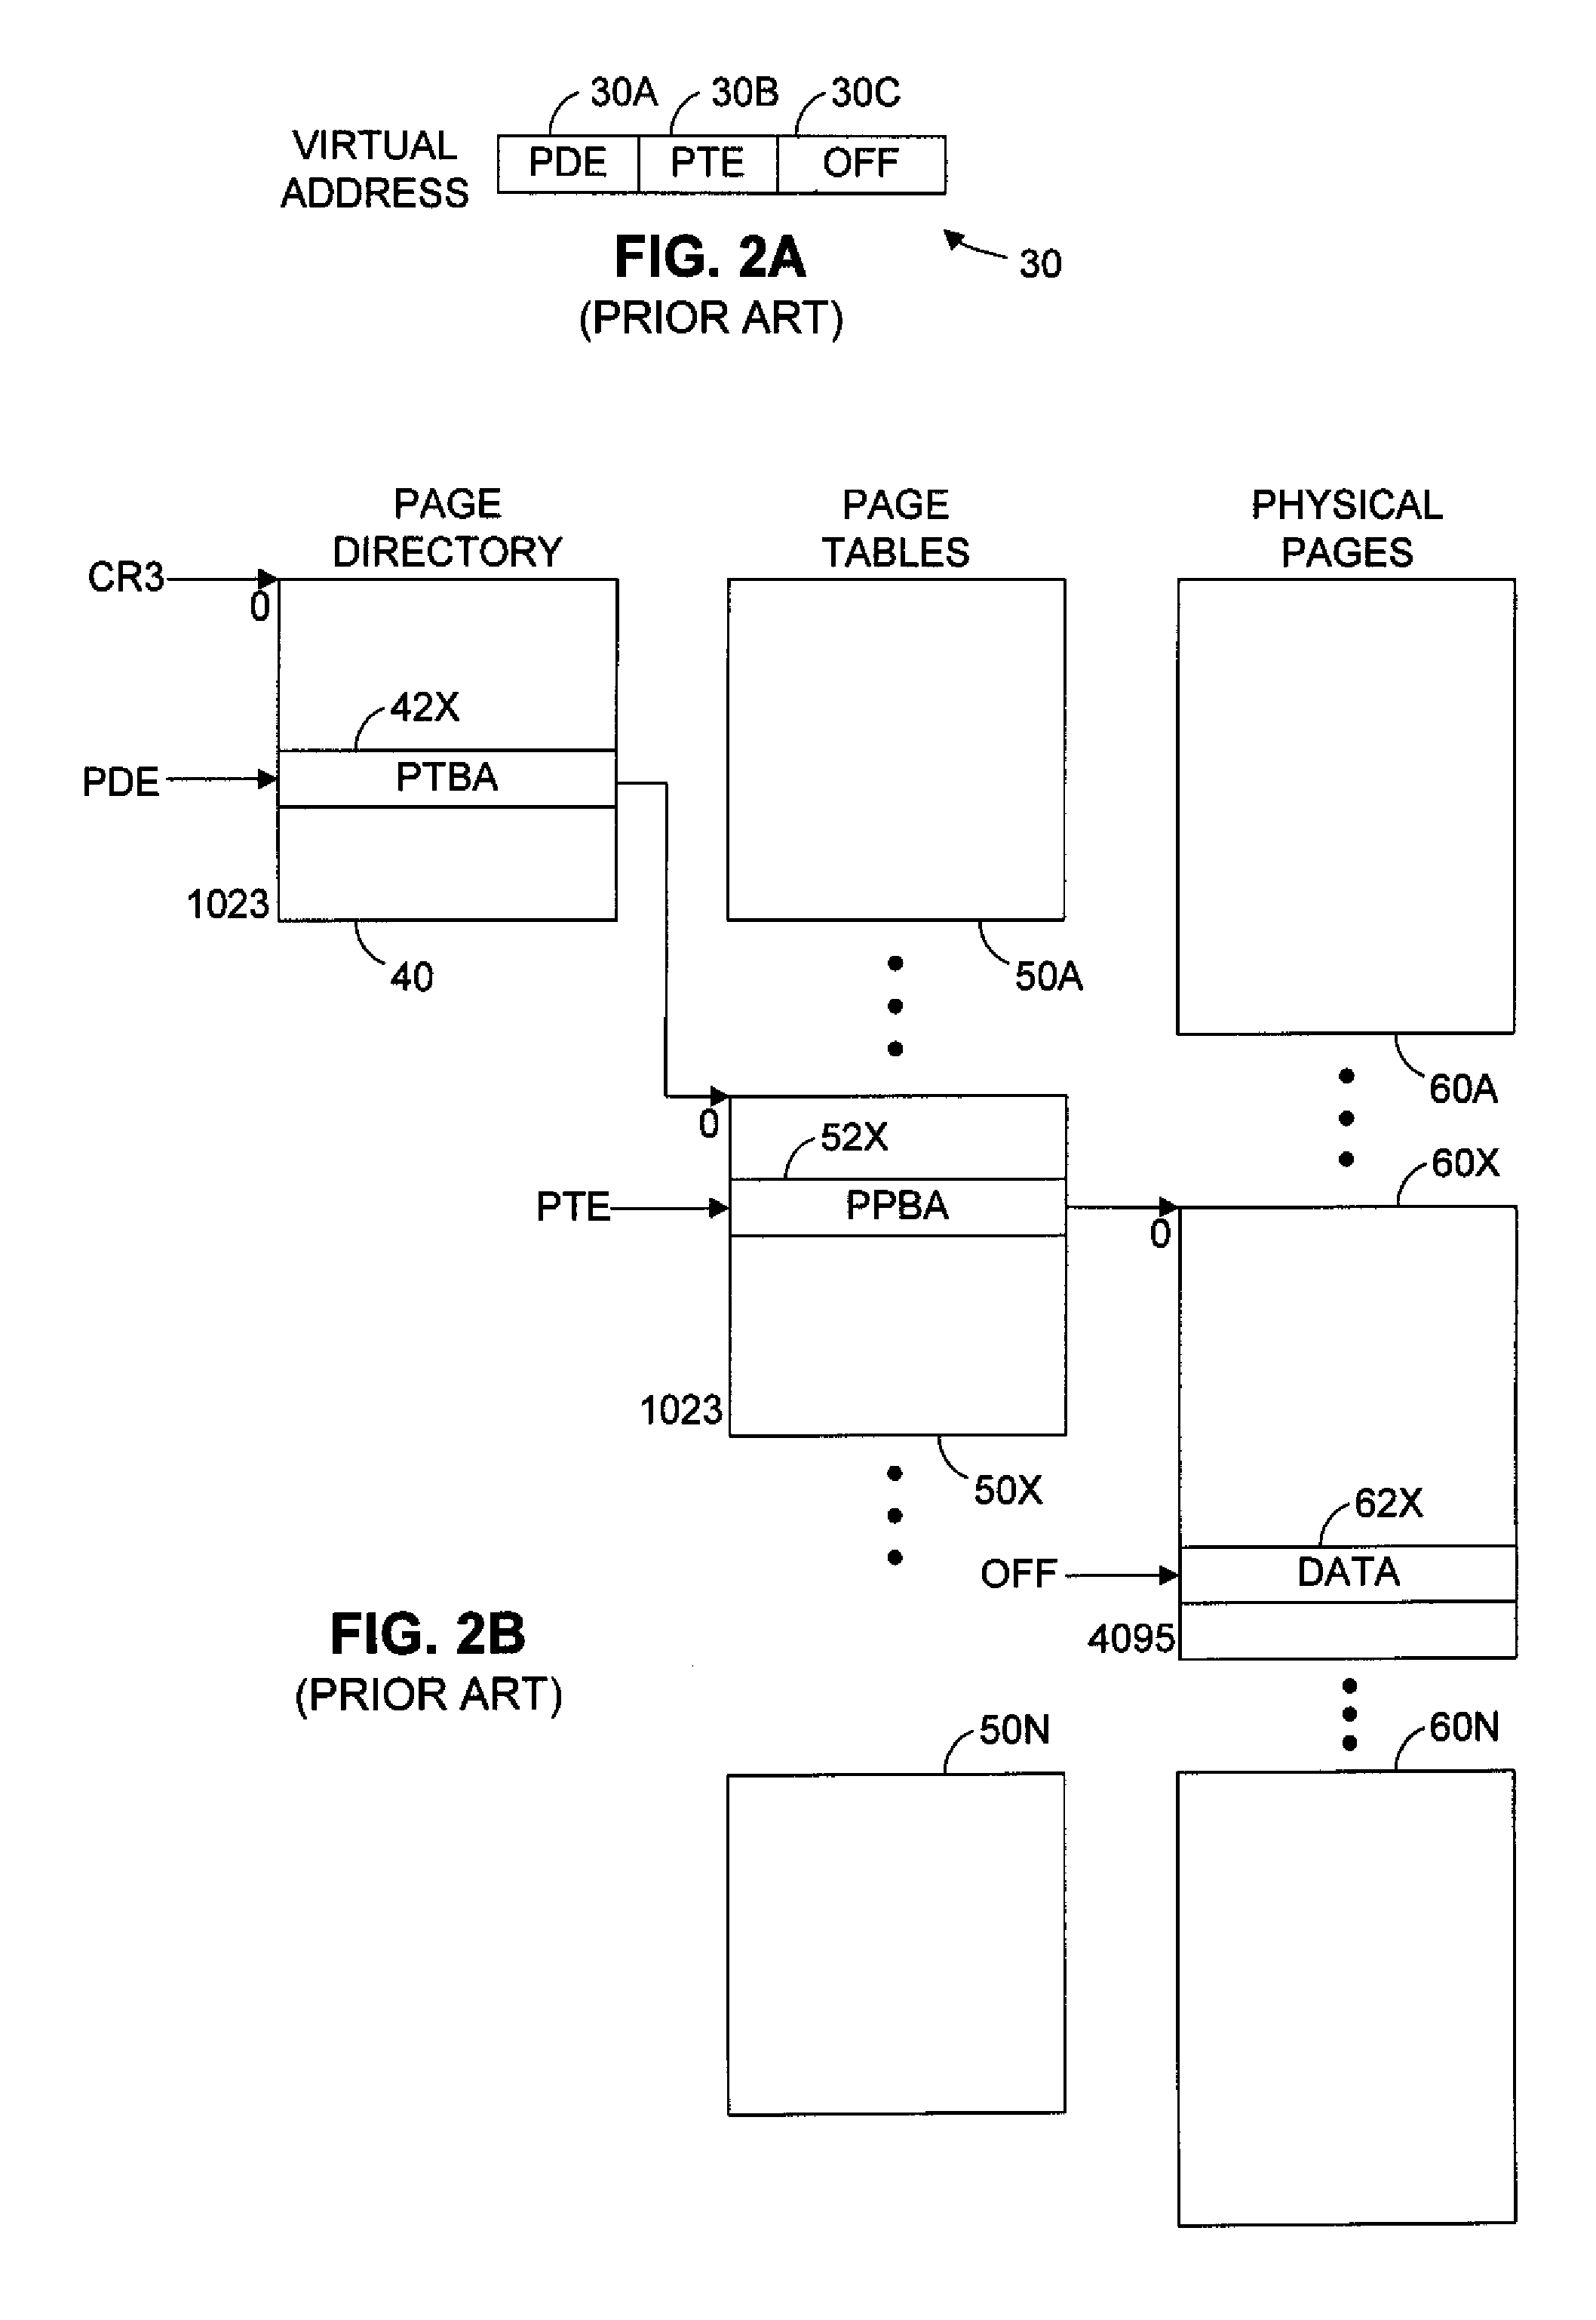 Maintaining address translations during the software-based processing of instructions